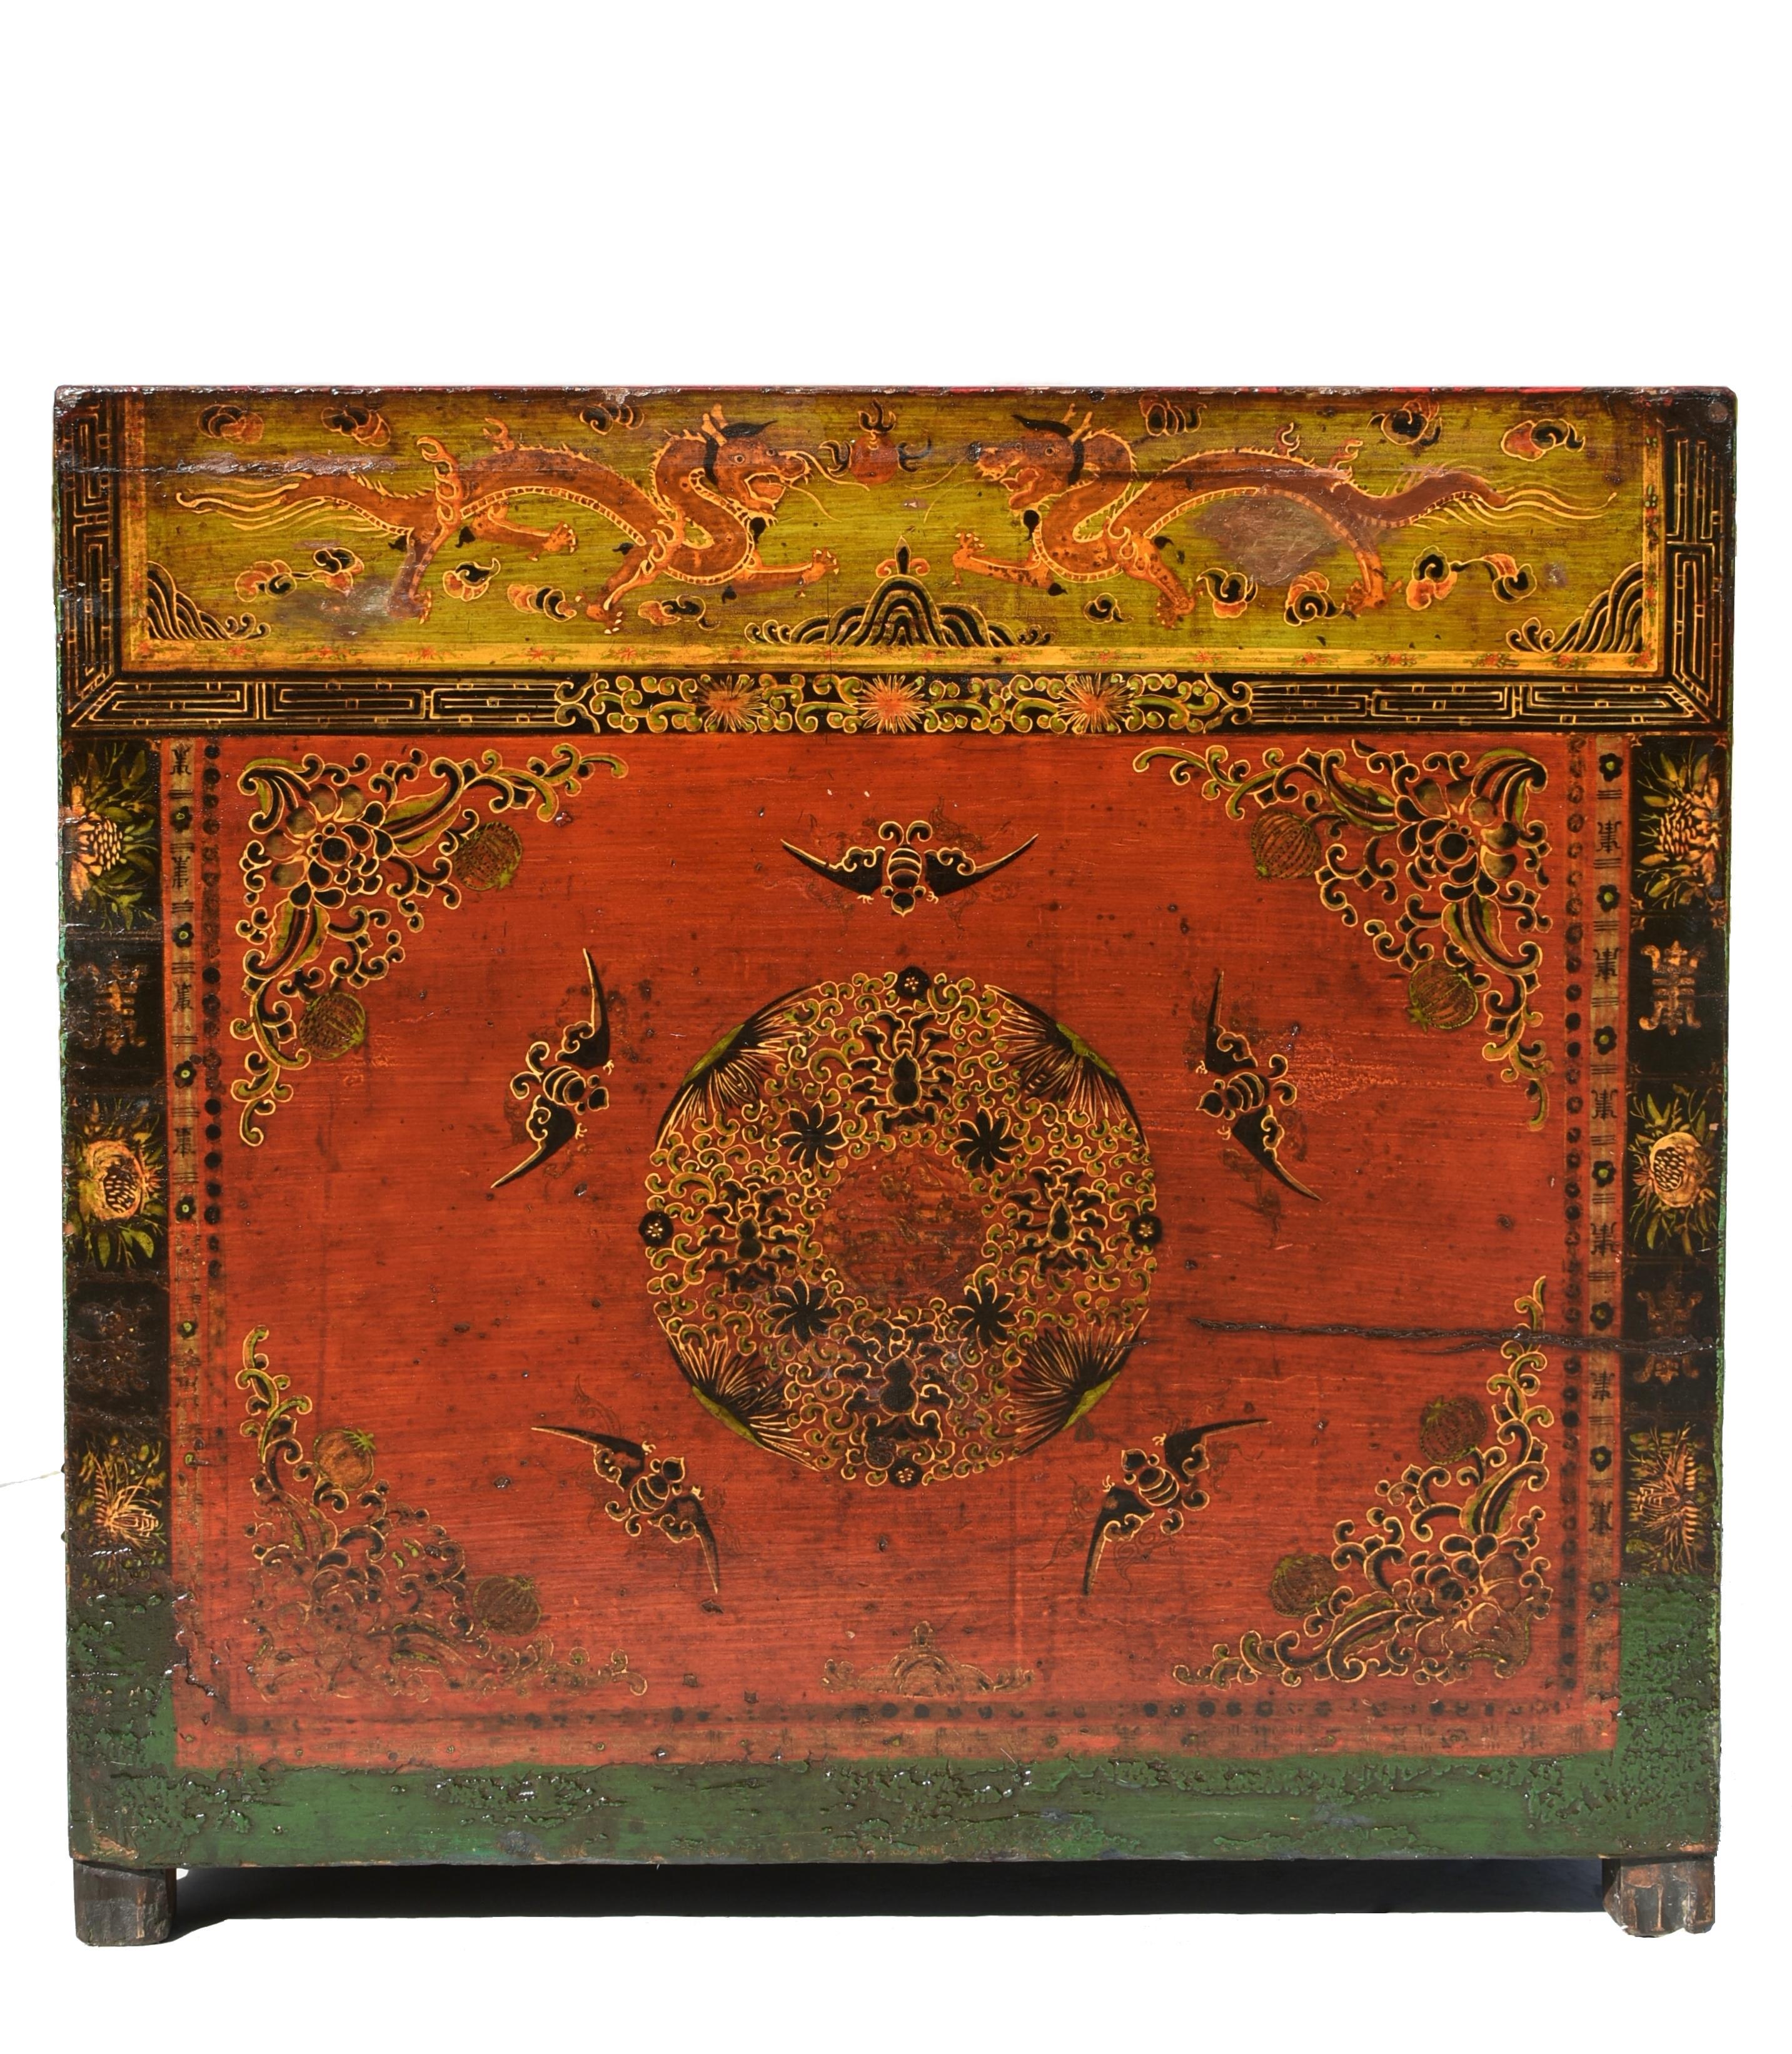 A rare 19th century hand painted, solid wood Mongolian chest. The front features a beautiful floral medallion surrounded by five bats, symbolizing good fortune and beauty. The four corners has peonies and pomegranates, symbolizing prosperity and